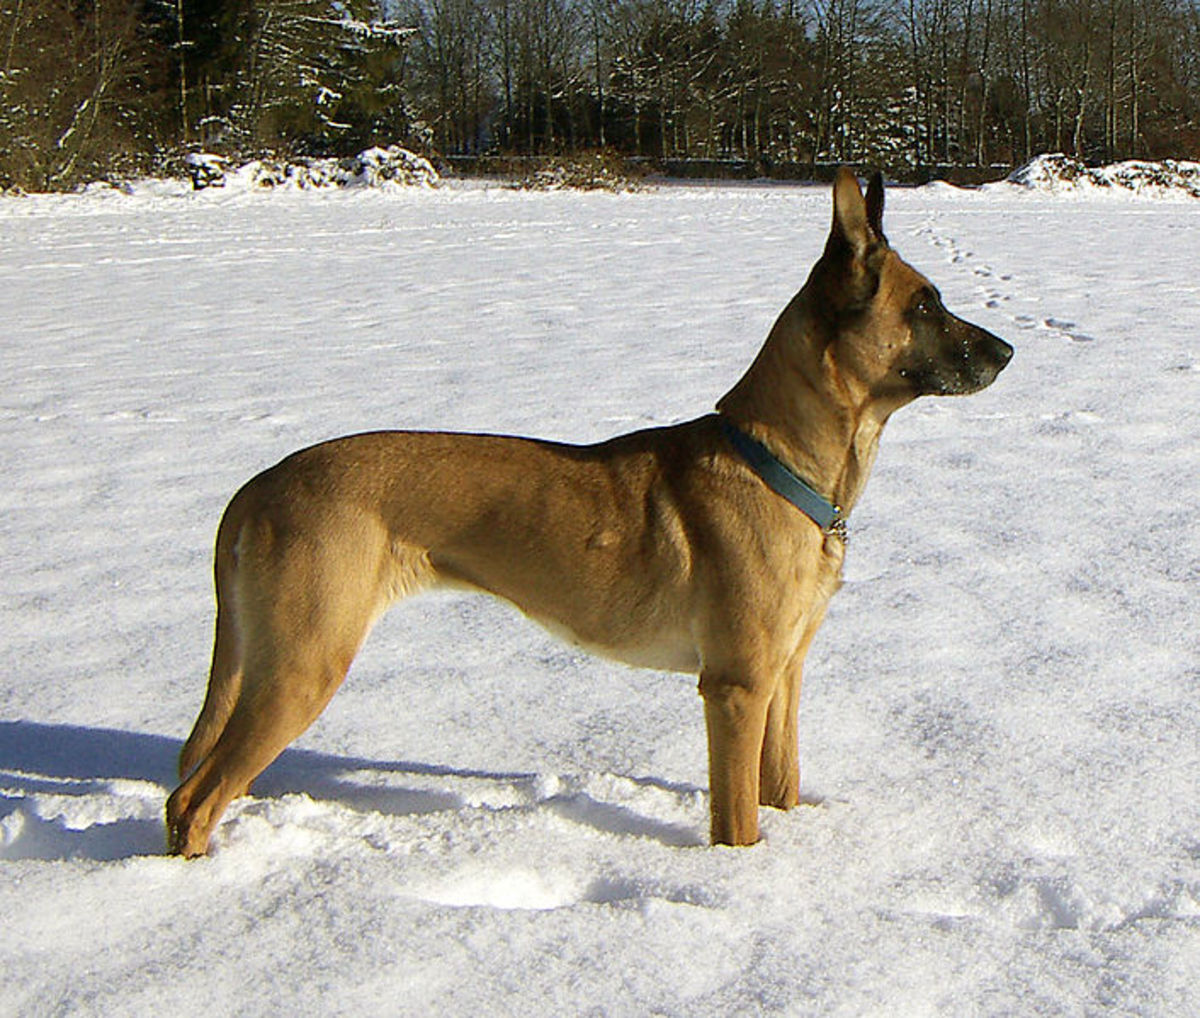 Belgian Malinois are used by police and military forces around the world.